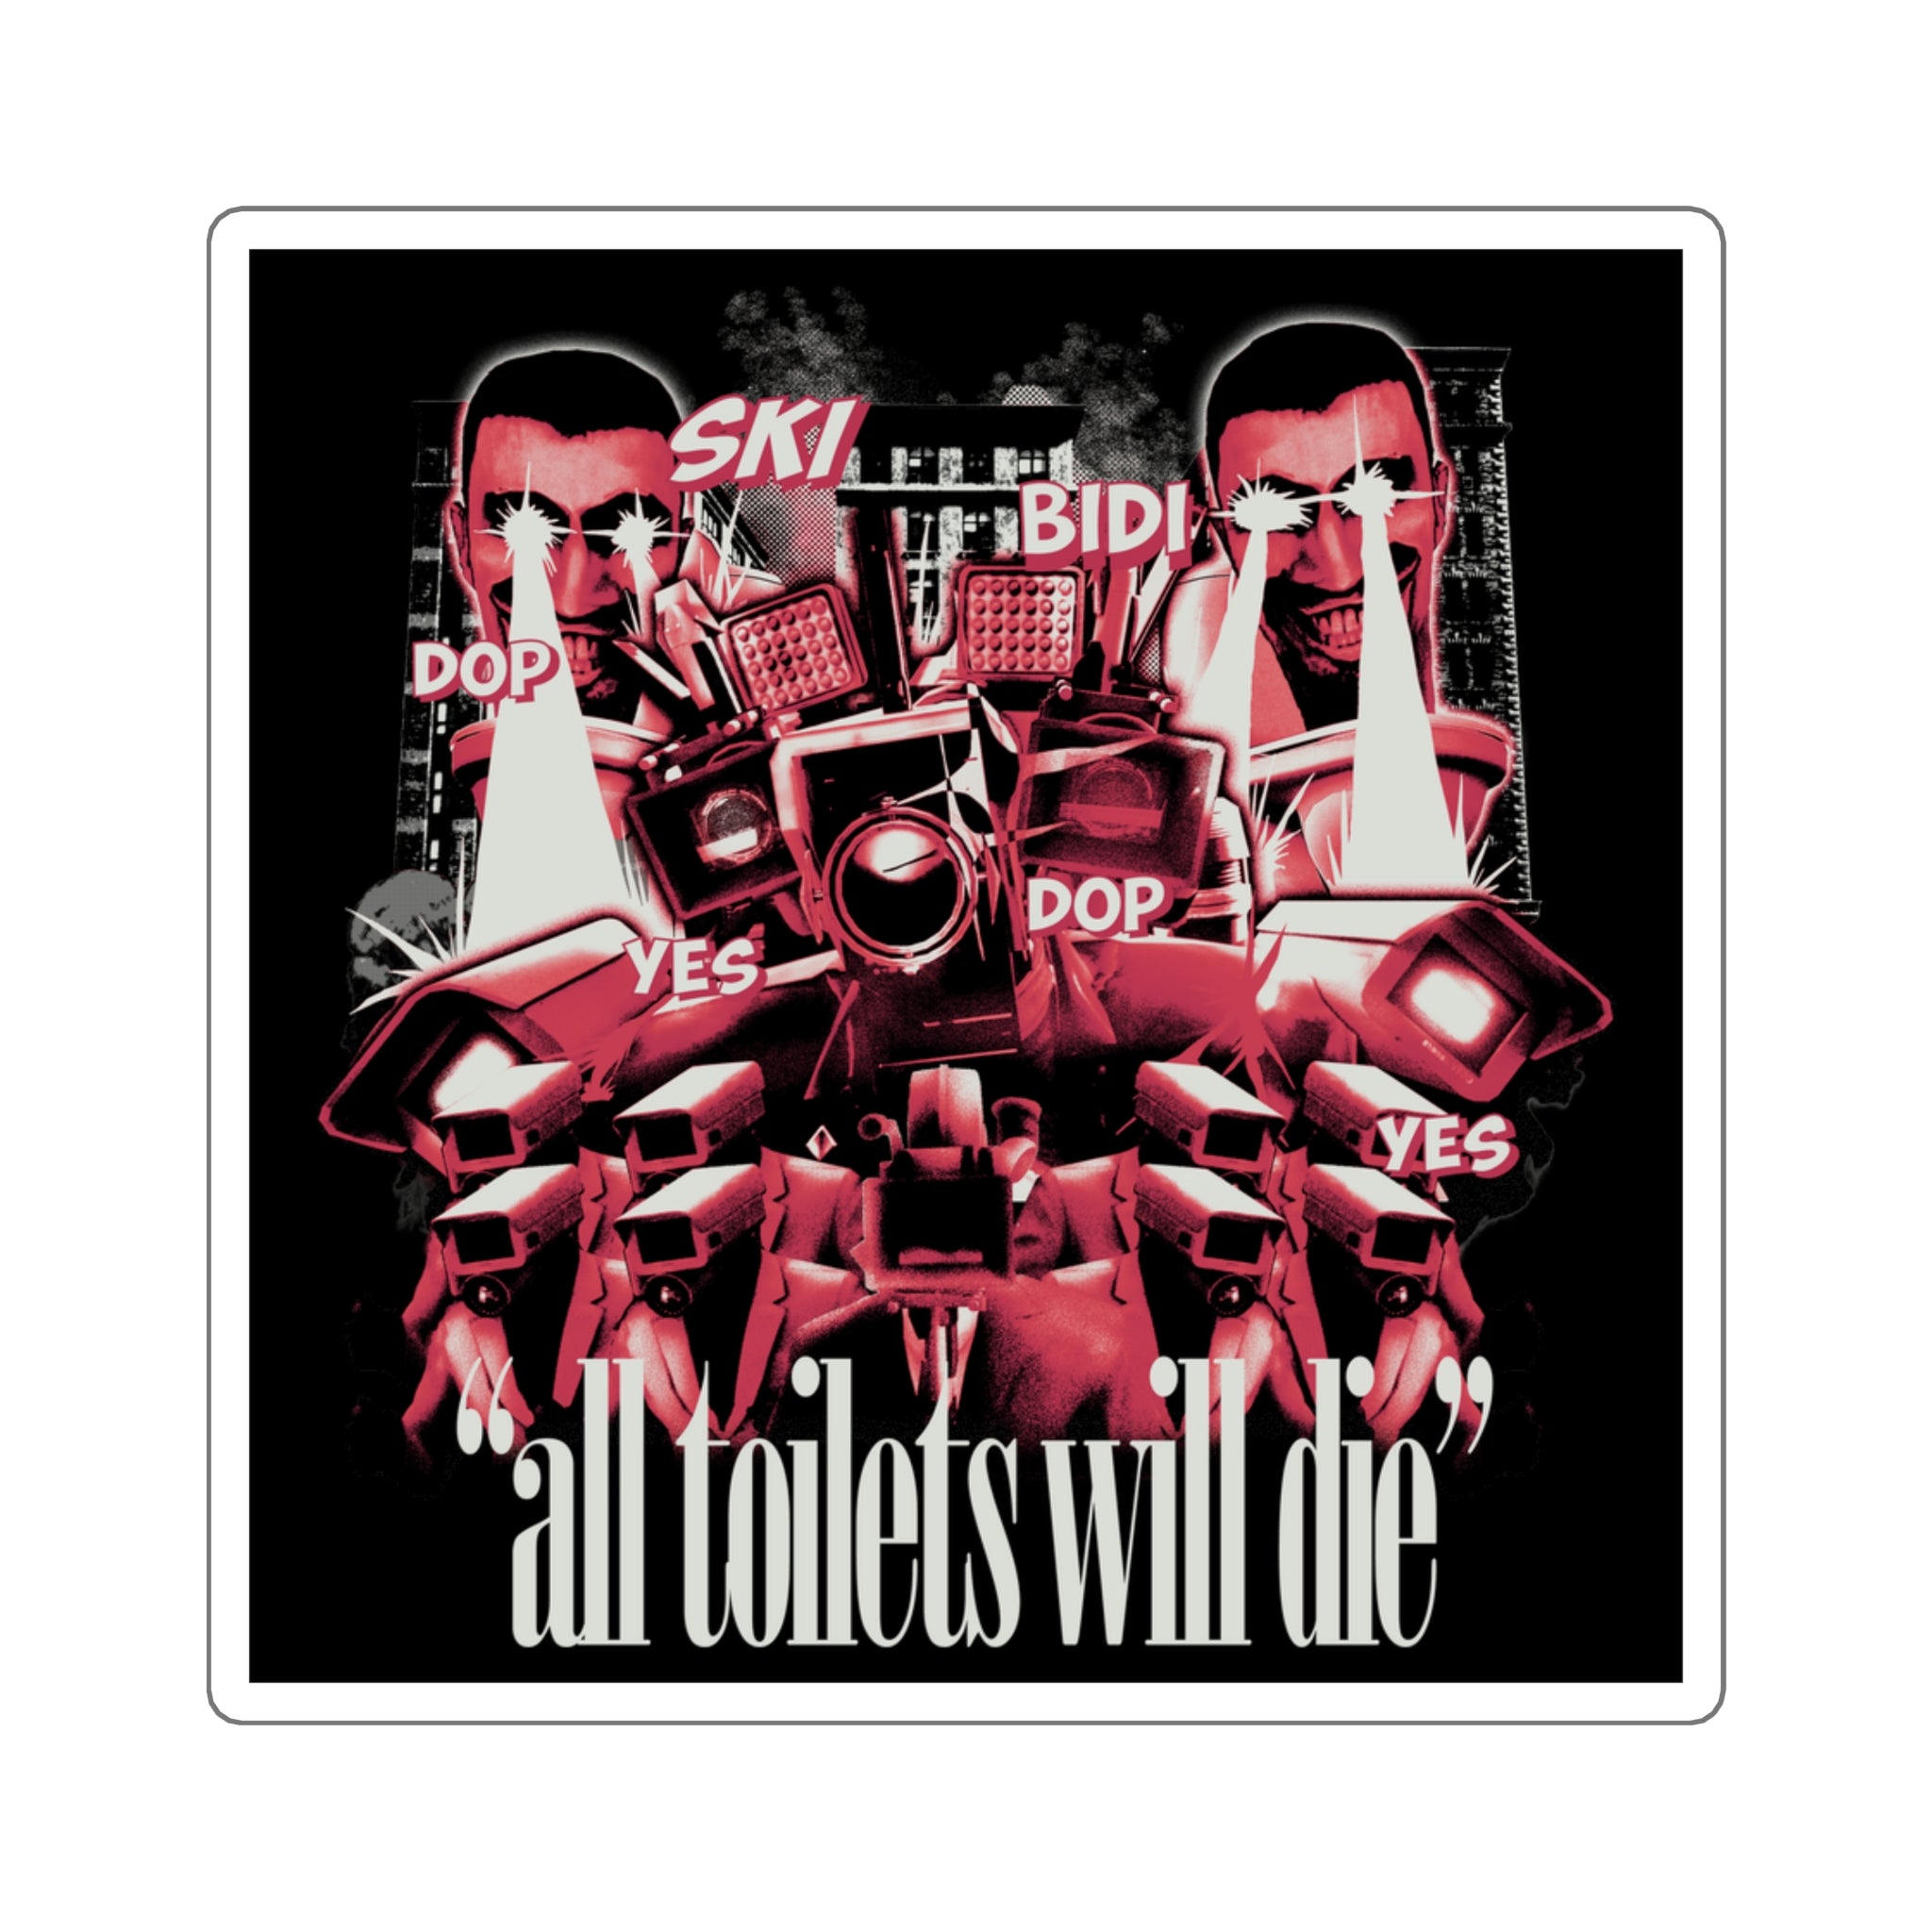 Streetwear skibidi collage sticker, black background, red characters